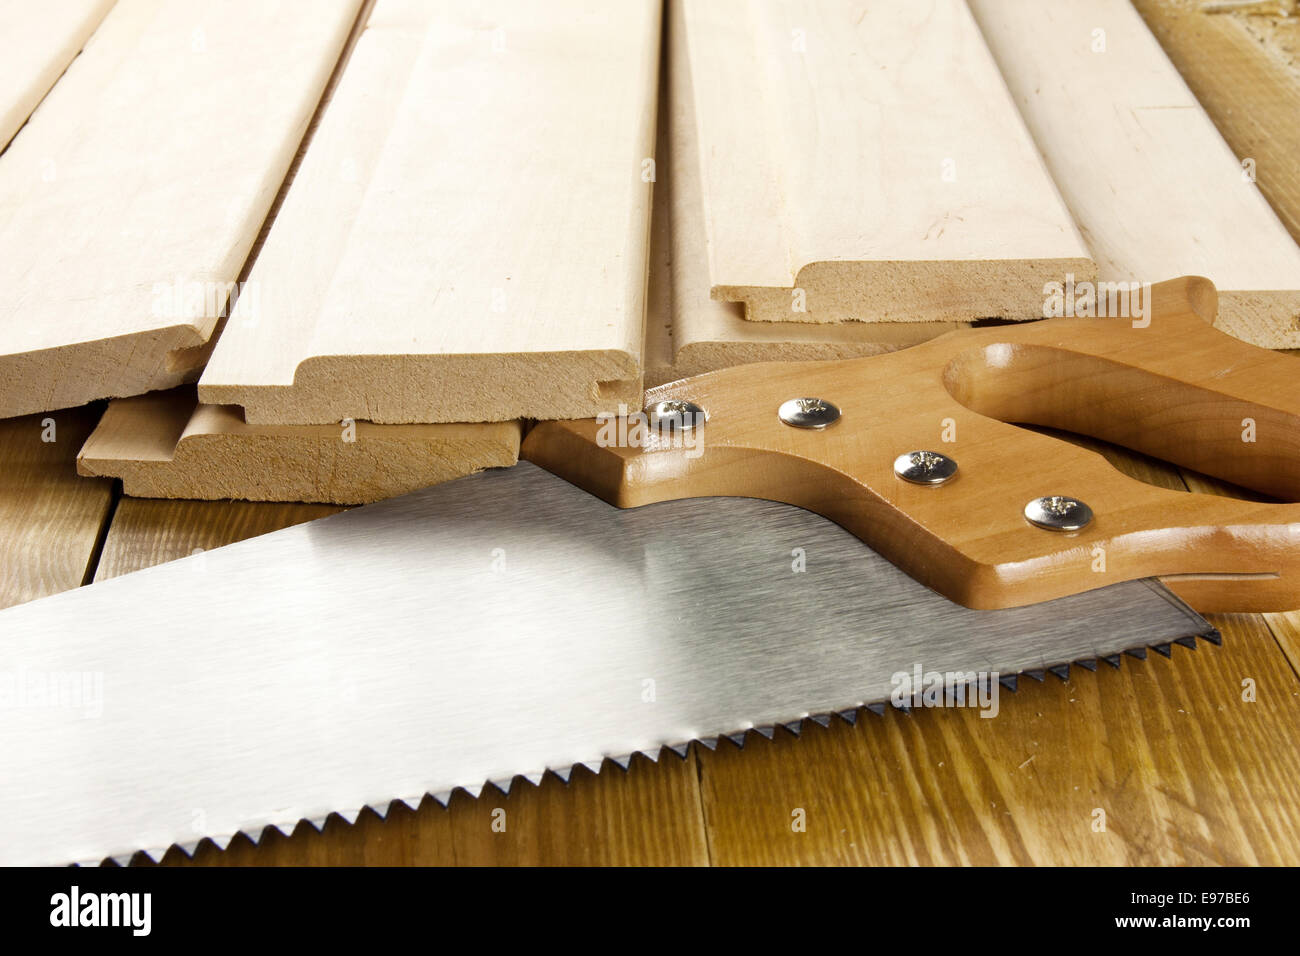 Carpenter's saw is on a woode planks Stock Photo